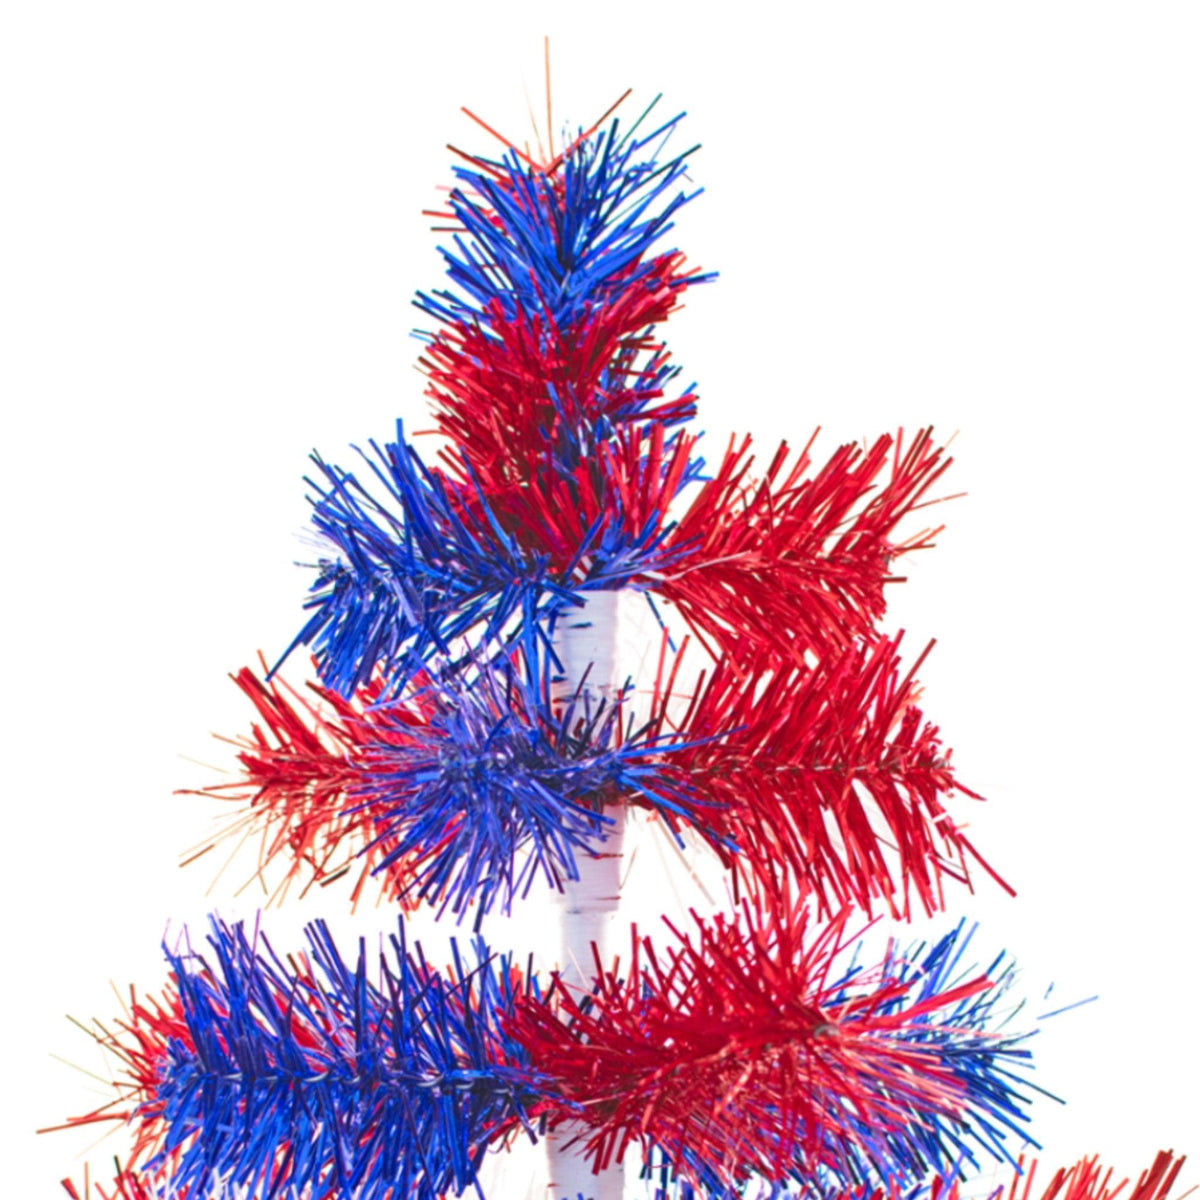 Top of the 24in Tall Red White and Blue Mixed Tinsel Christmas Tree on sale at leedisplay.com.